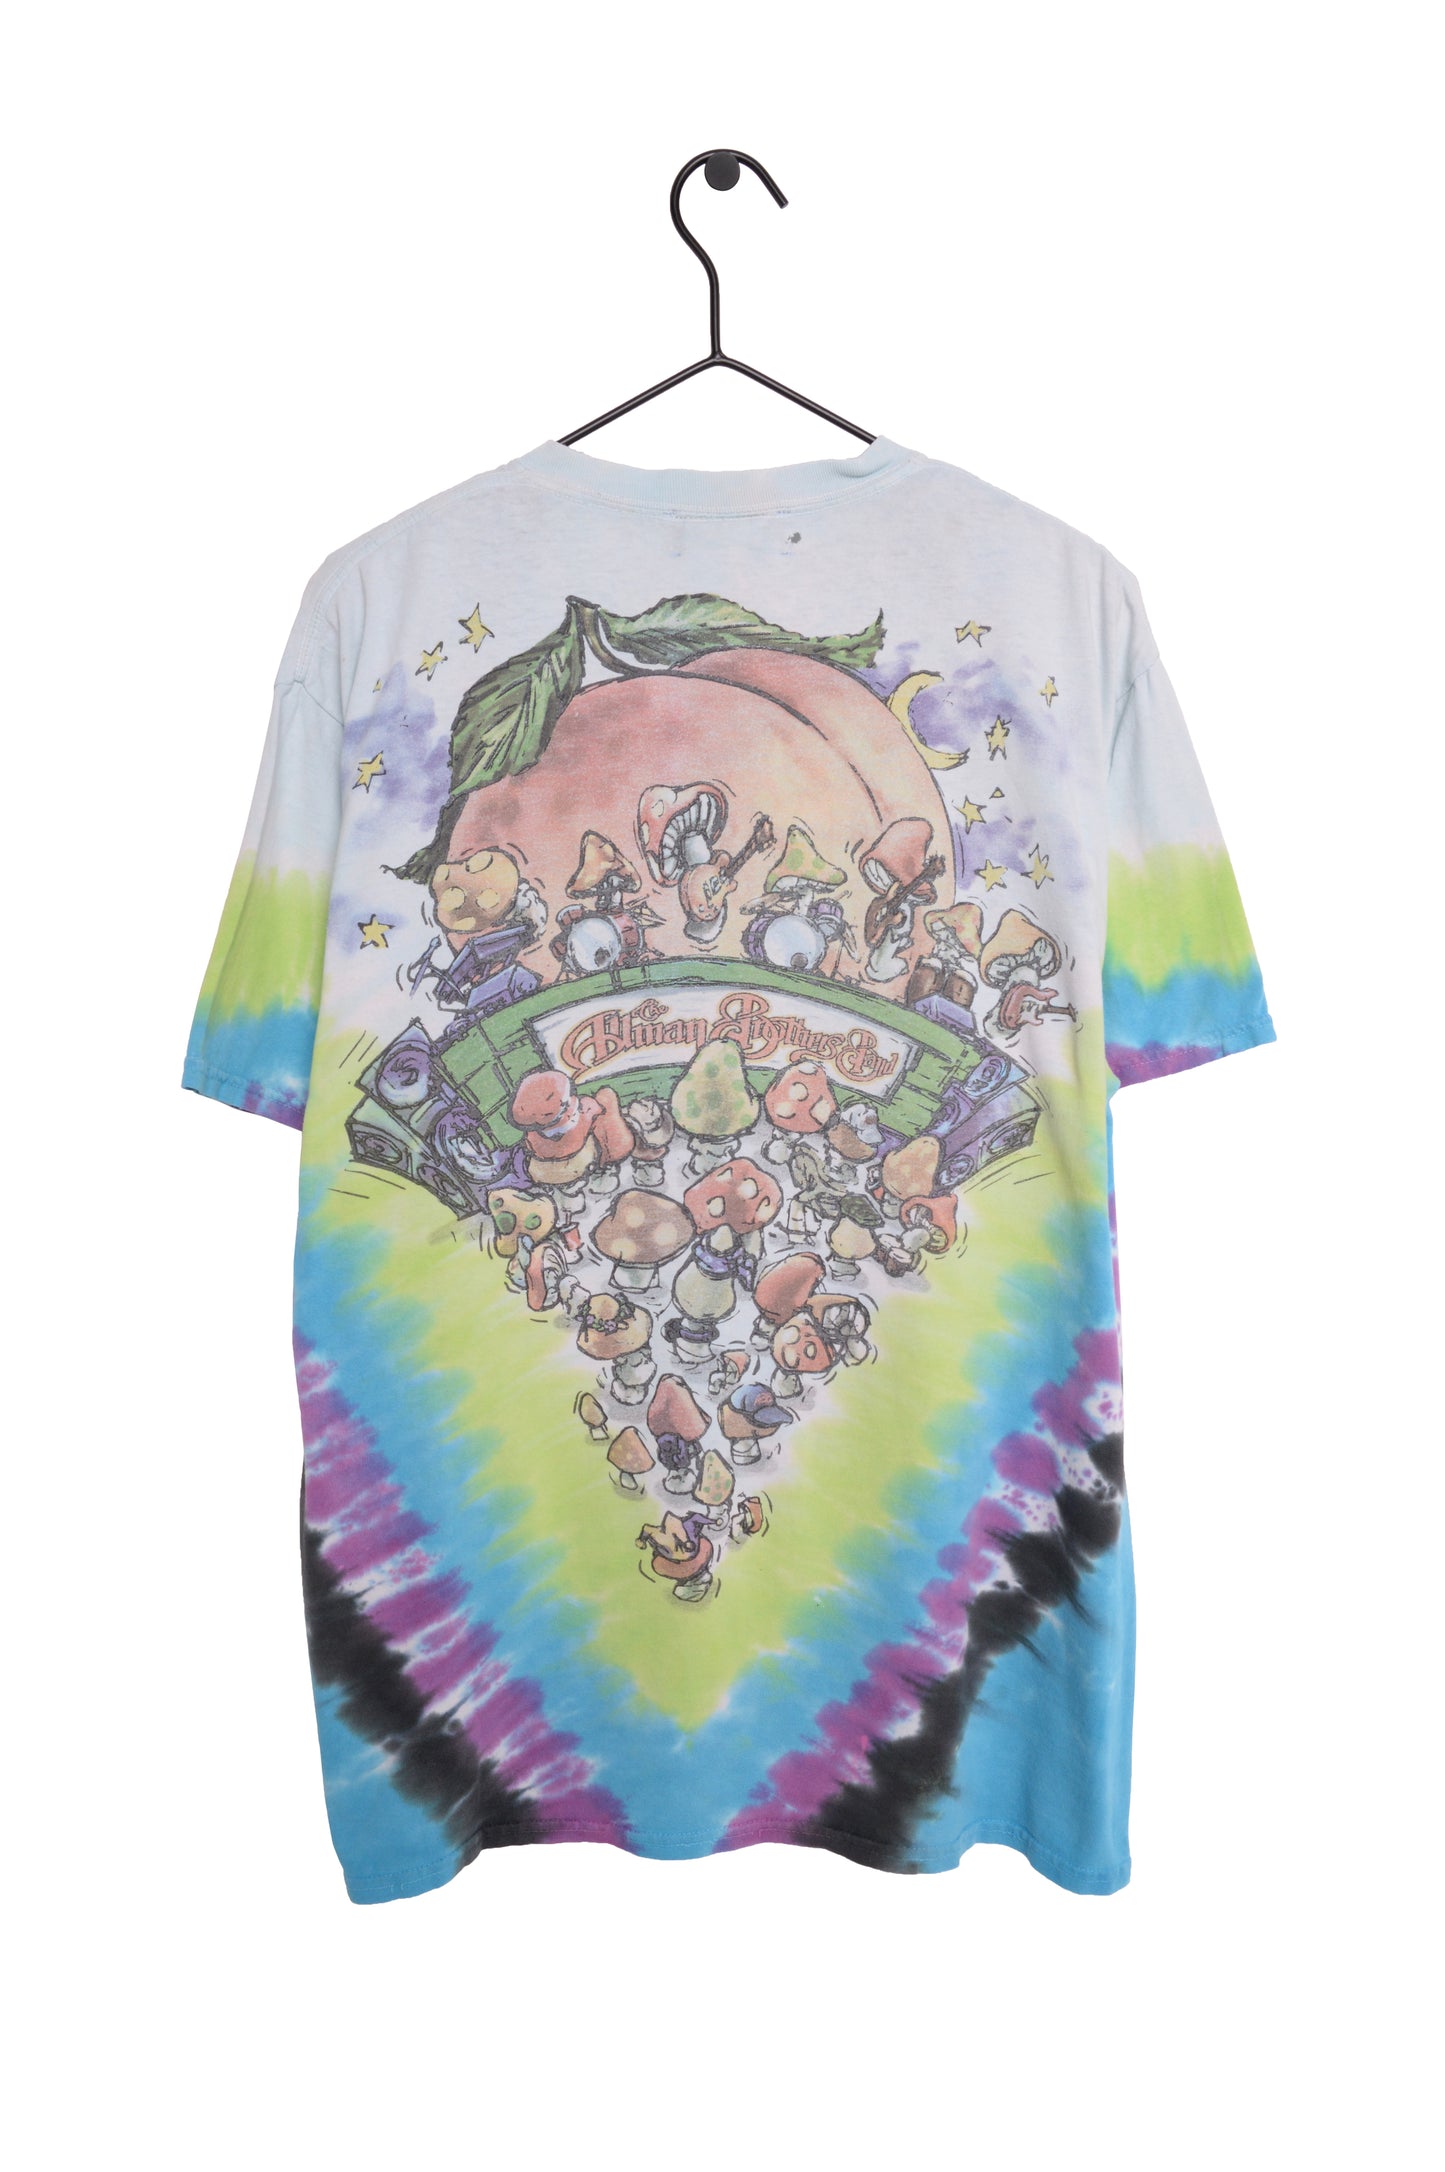 The Allman Brothers Band Tie Dye Tee